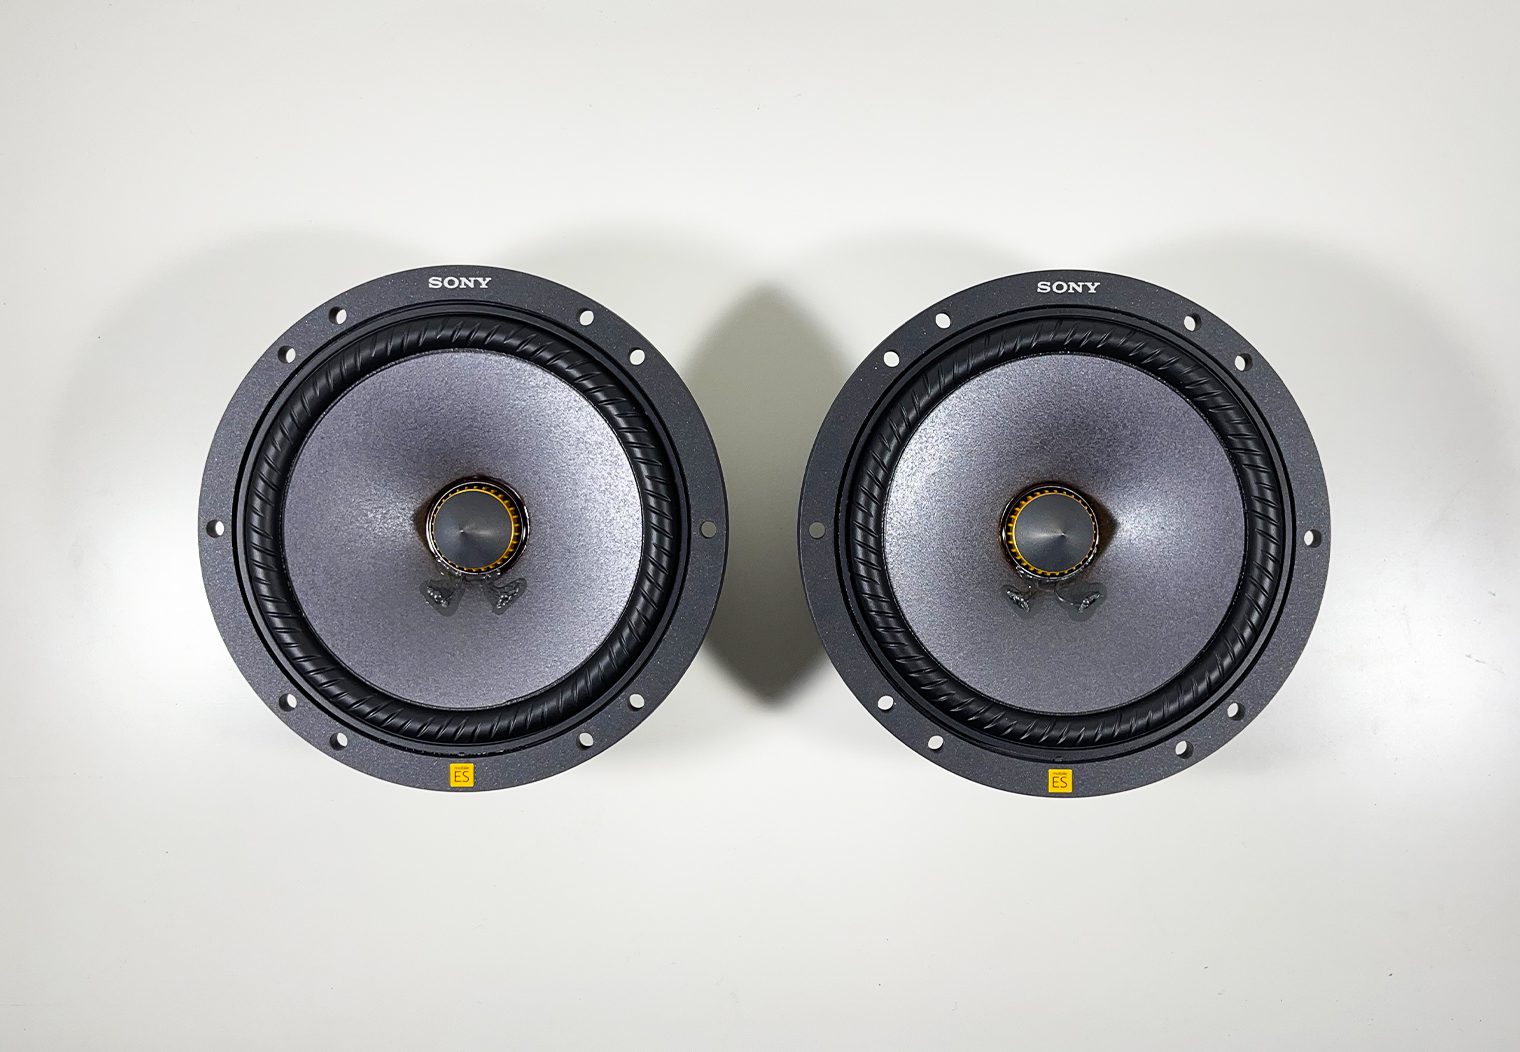 Sony XS-163ES 6 1/2 inch speakers without grille